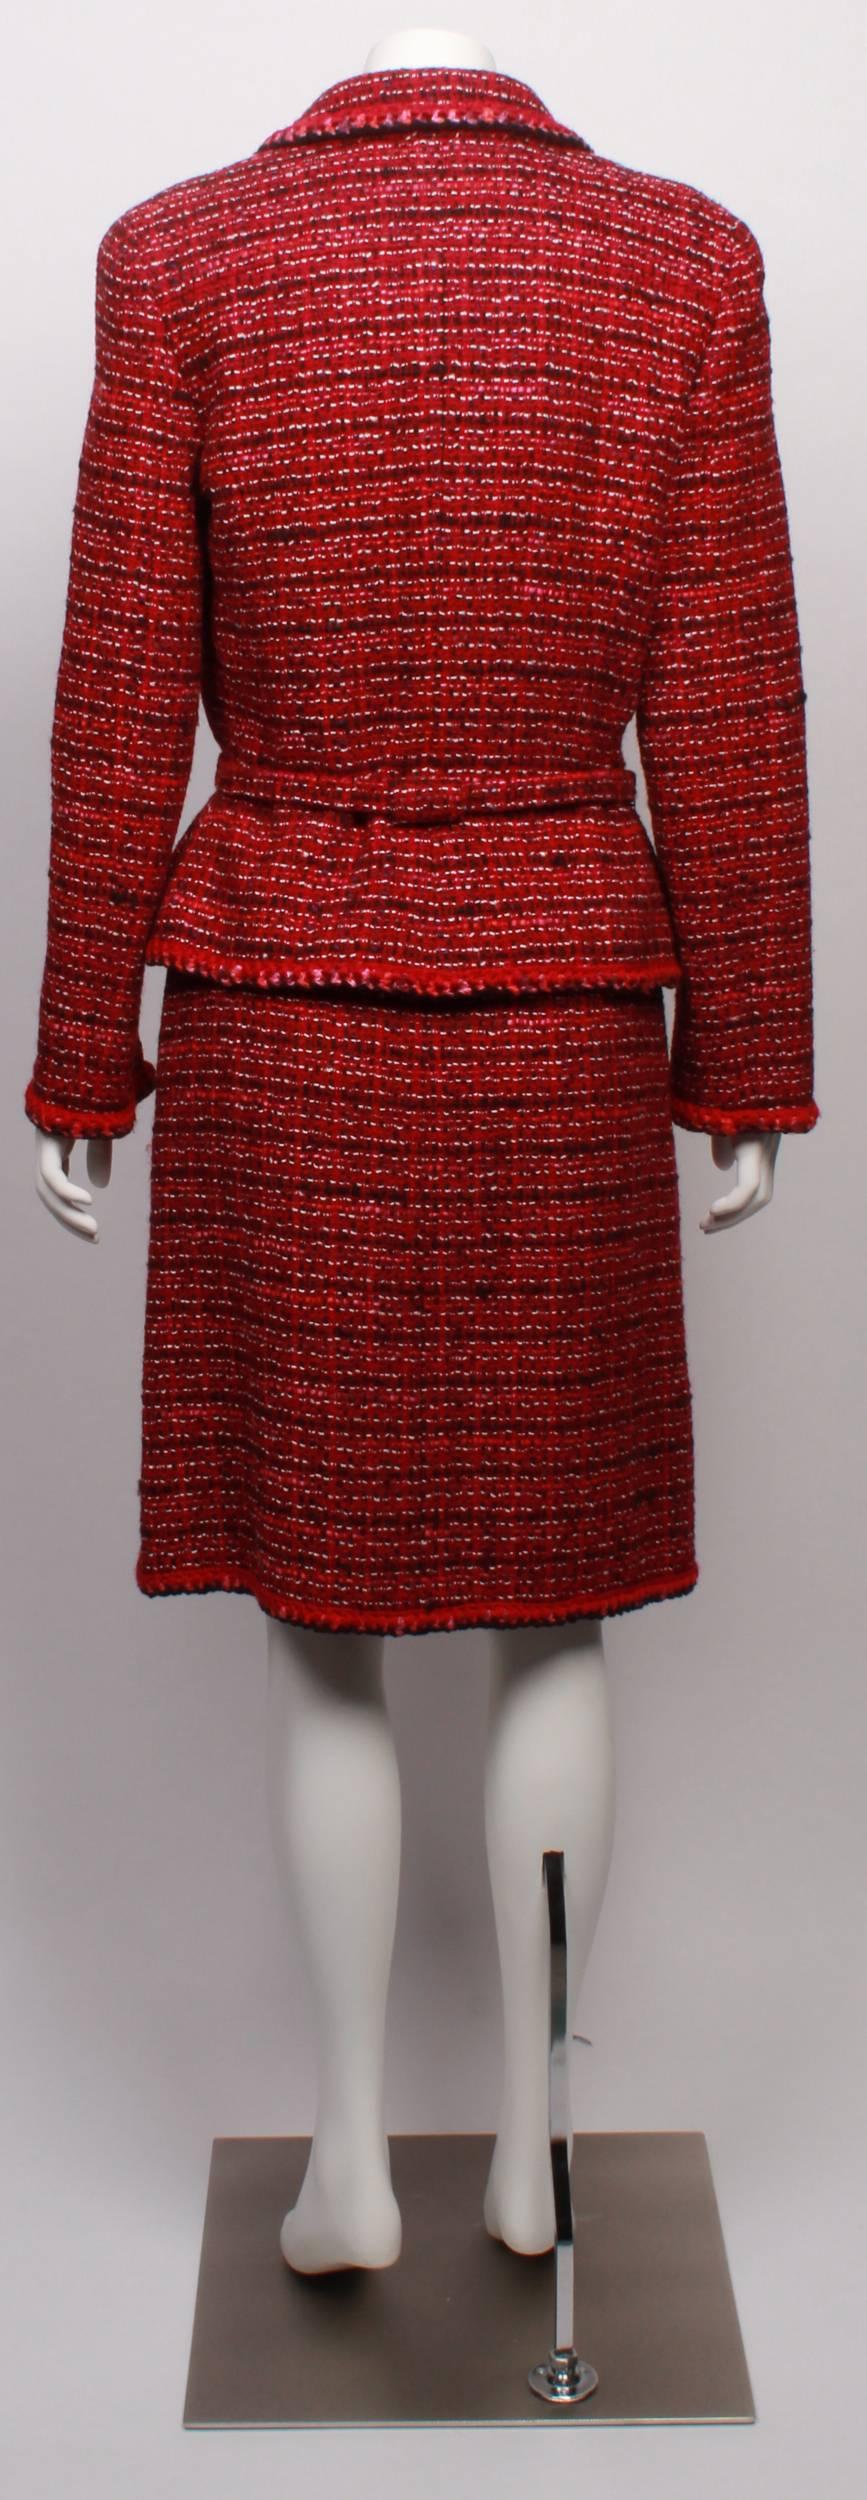 Chanel, multi tone, tweed, jacket and dress ensemble in rich tones of burgundy,
and reds. Jacket is belted, with lapels and breast pockets with a woollen crochet decorative  edging. Dress is sleeveless, with a scoop neckline, and a semi fitted